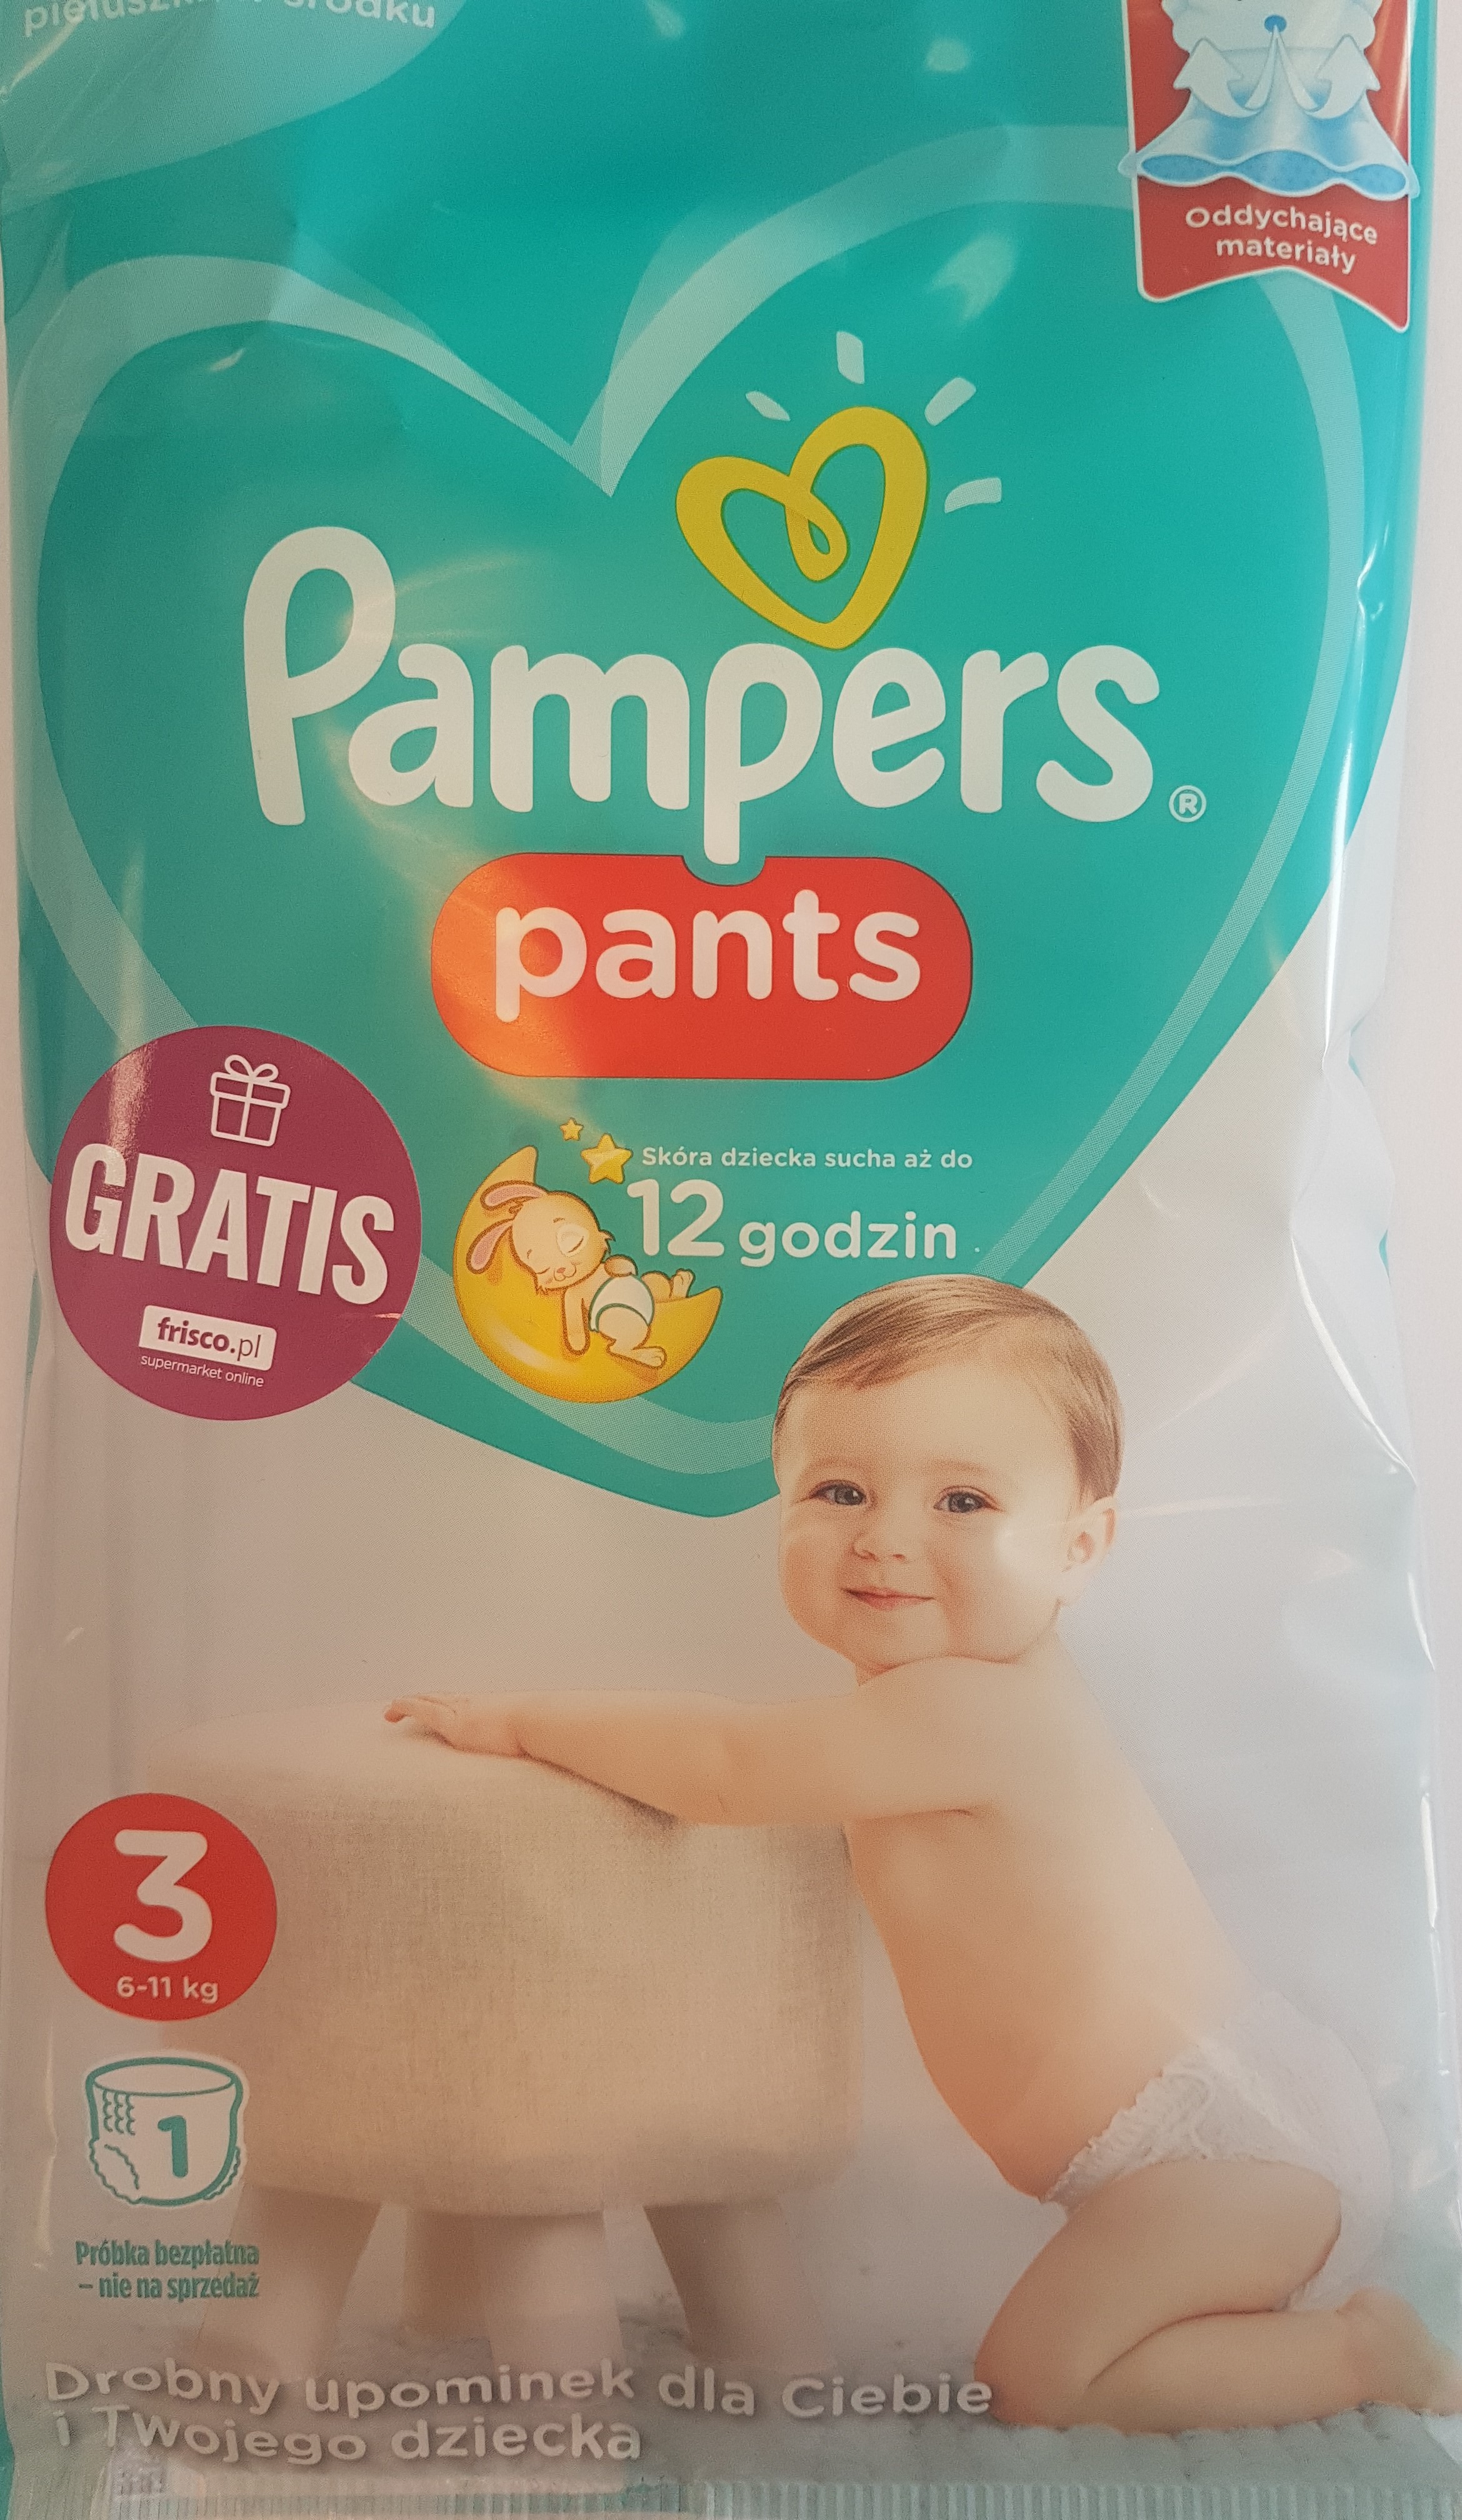 promcje pampers